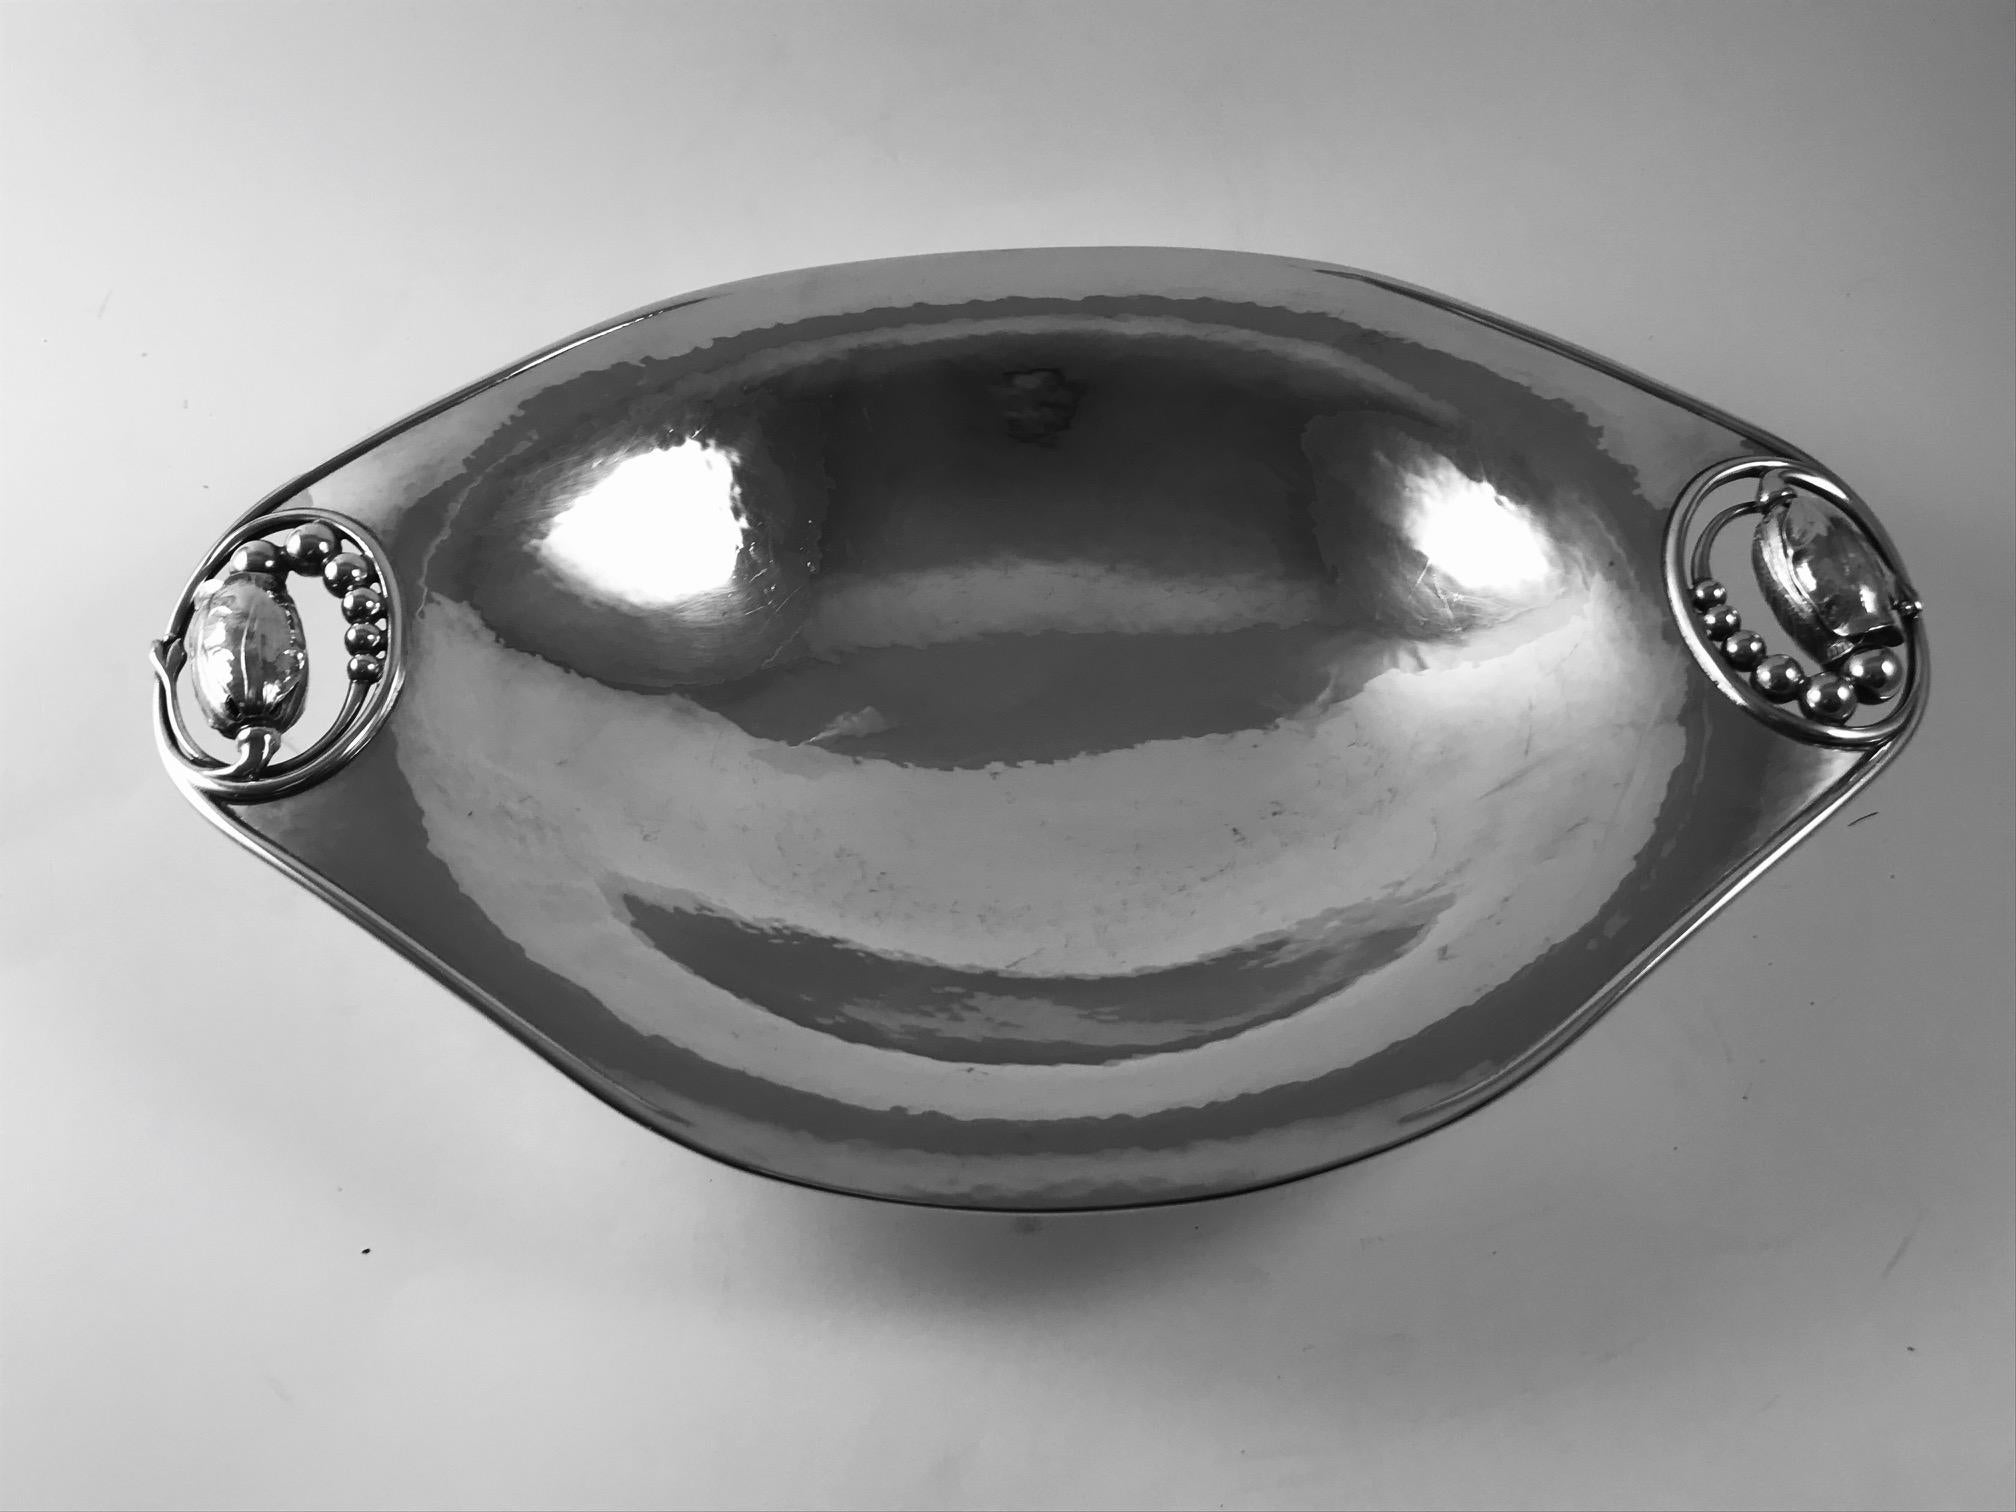 A pair of sought-after Georg Jensen Blossom oval footed bread trays, design #2A by Georg Jensen.
Each measures 12? in length x 7 3/4